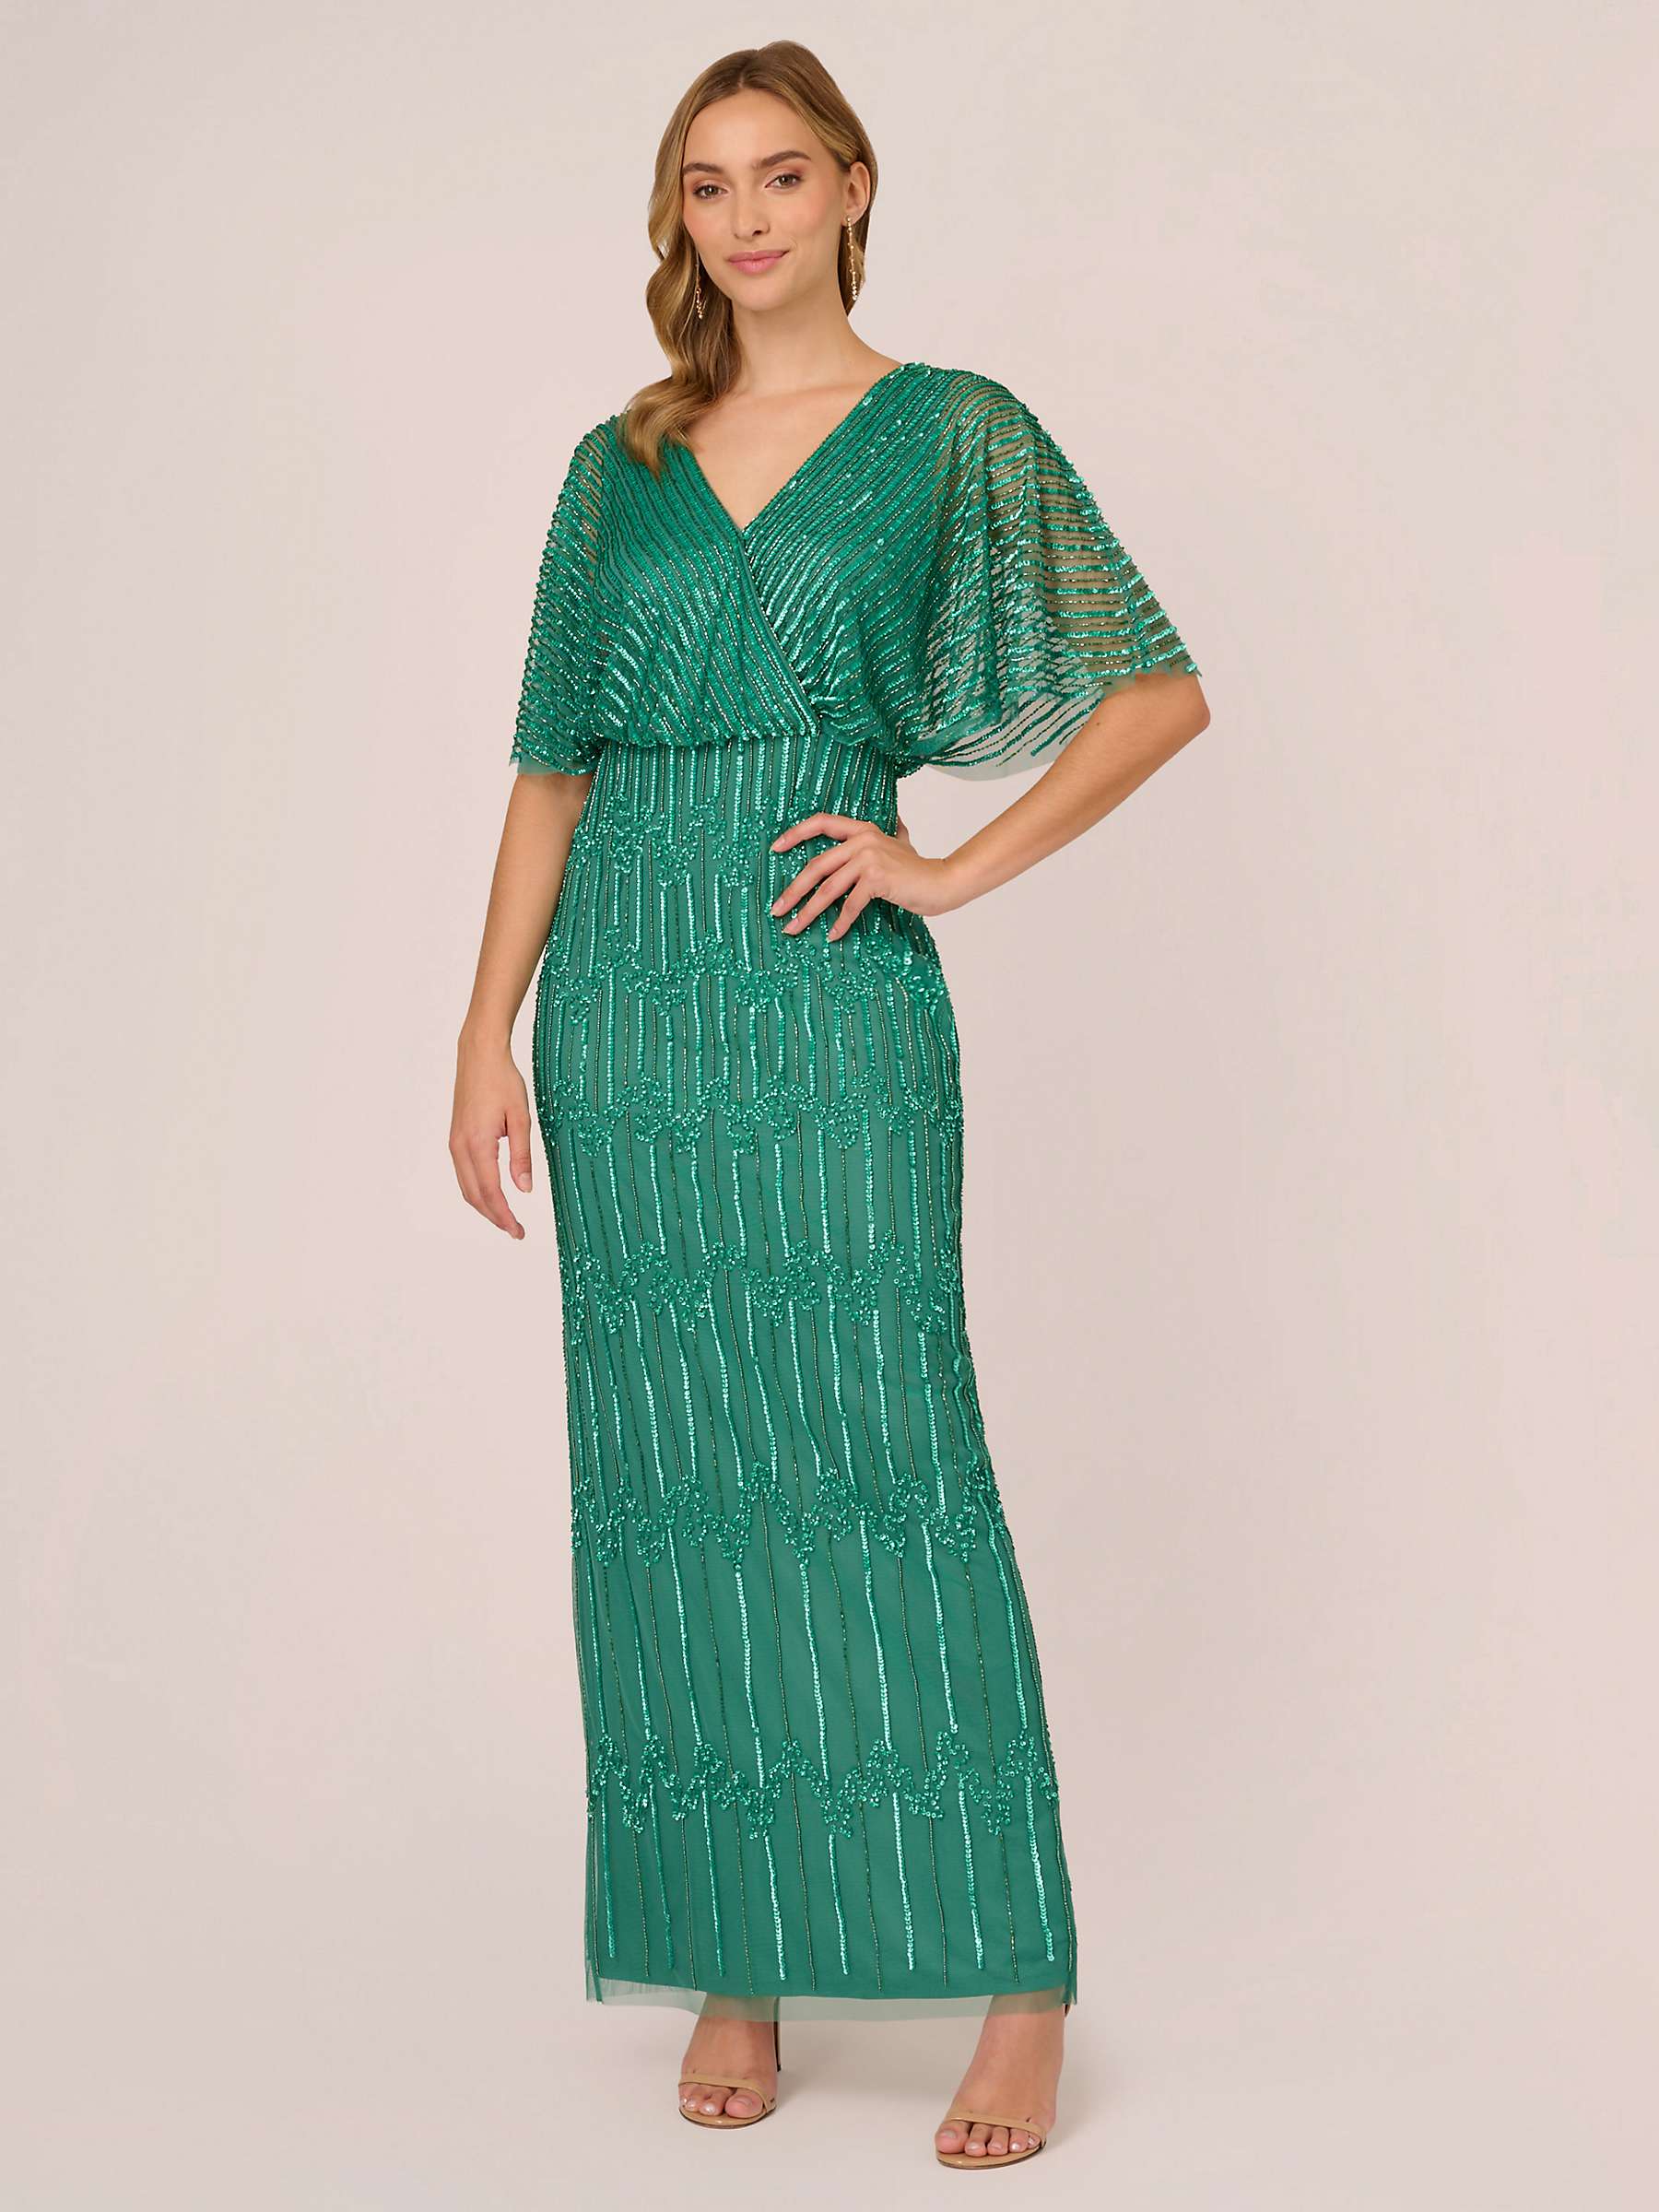 Buy Adrianna Papell Beaded Surplice Maxi Dress, Jungle Green Online at johnlewis.com